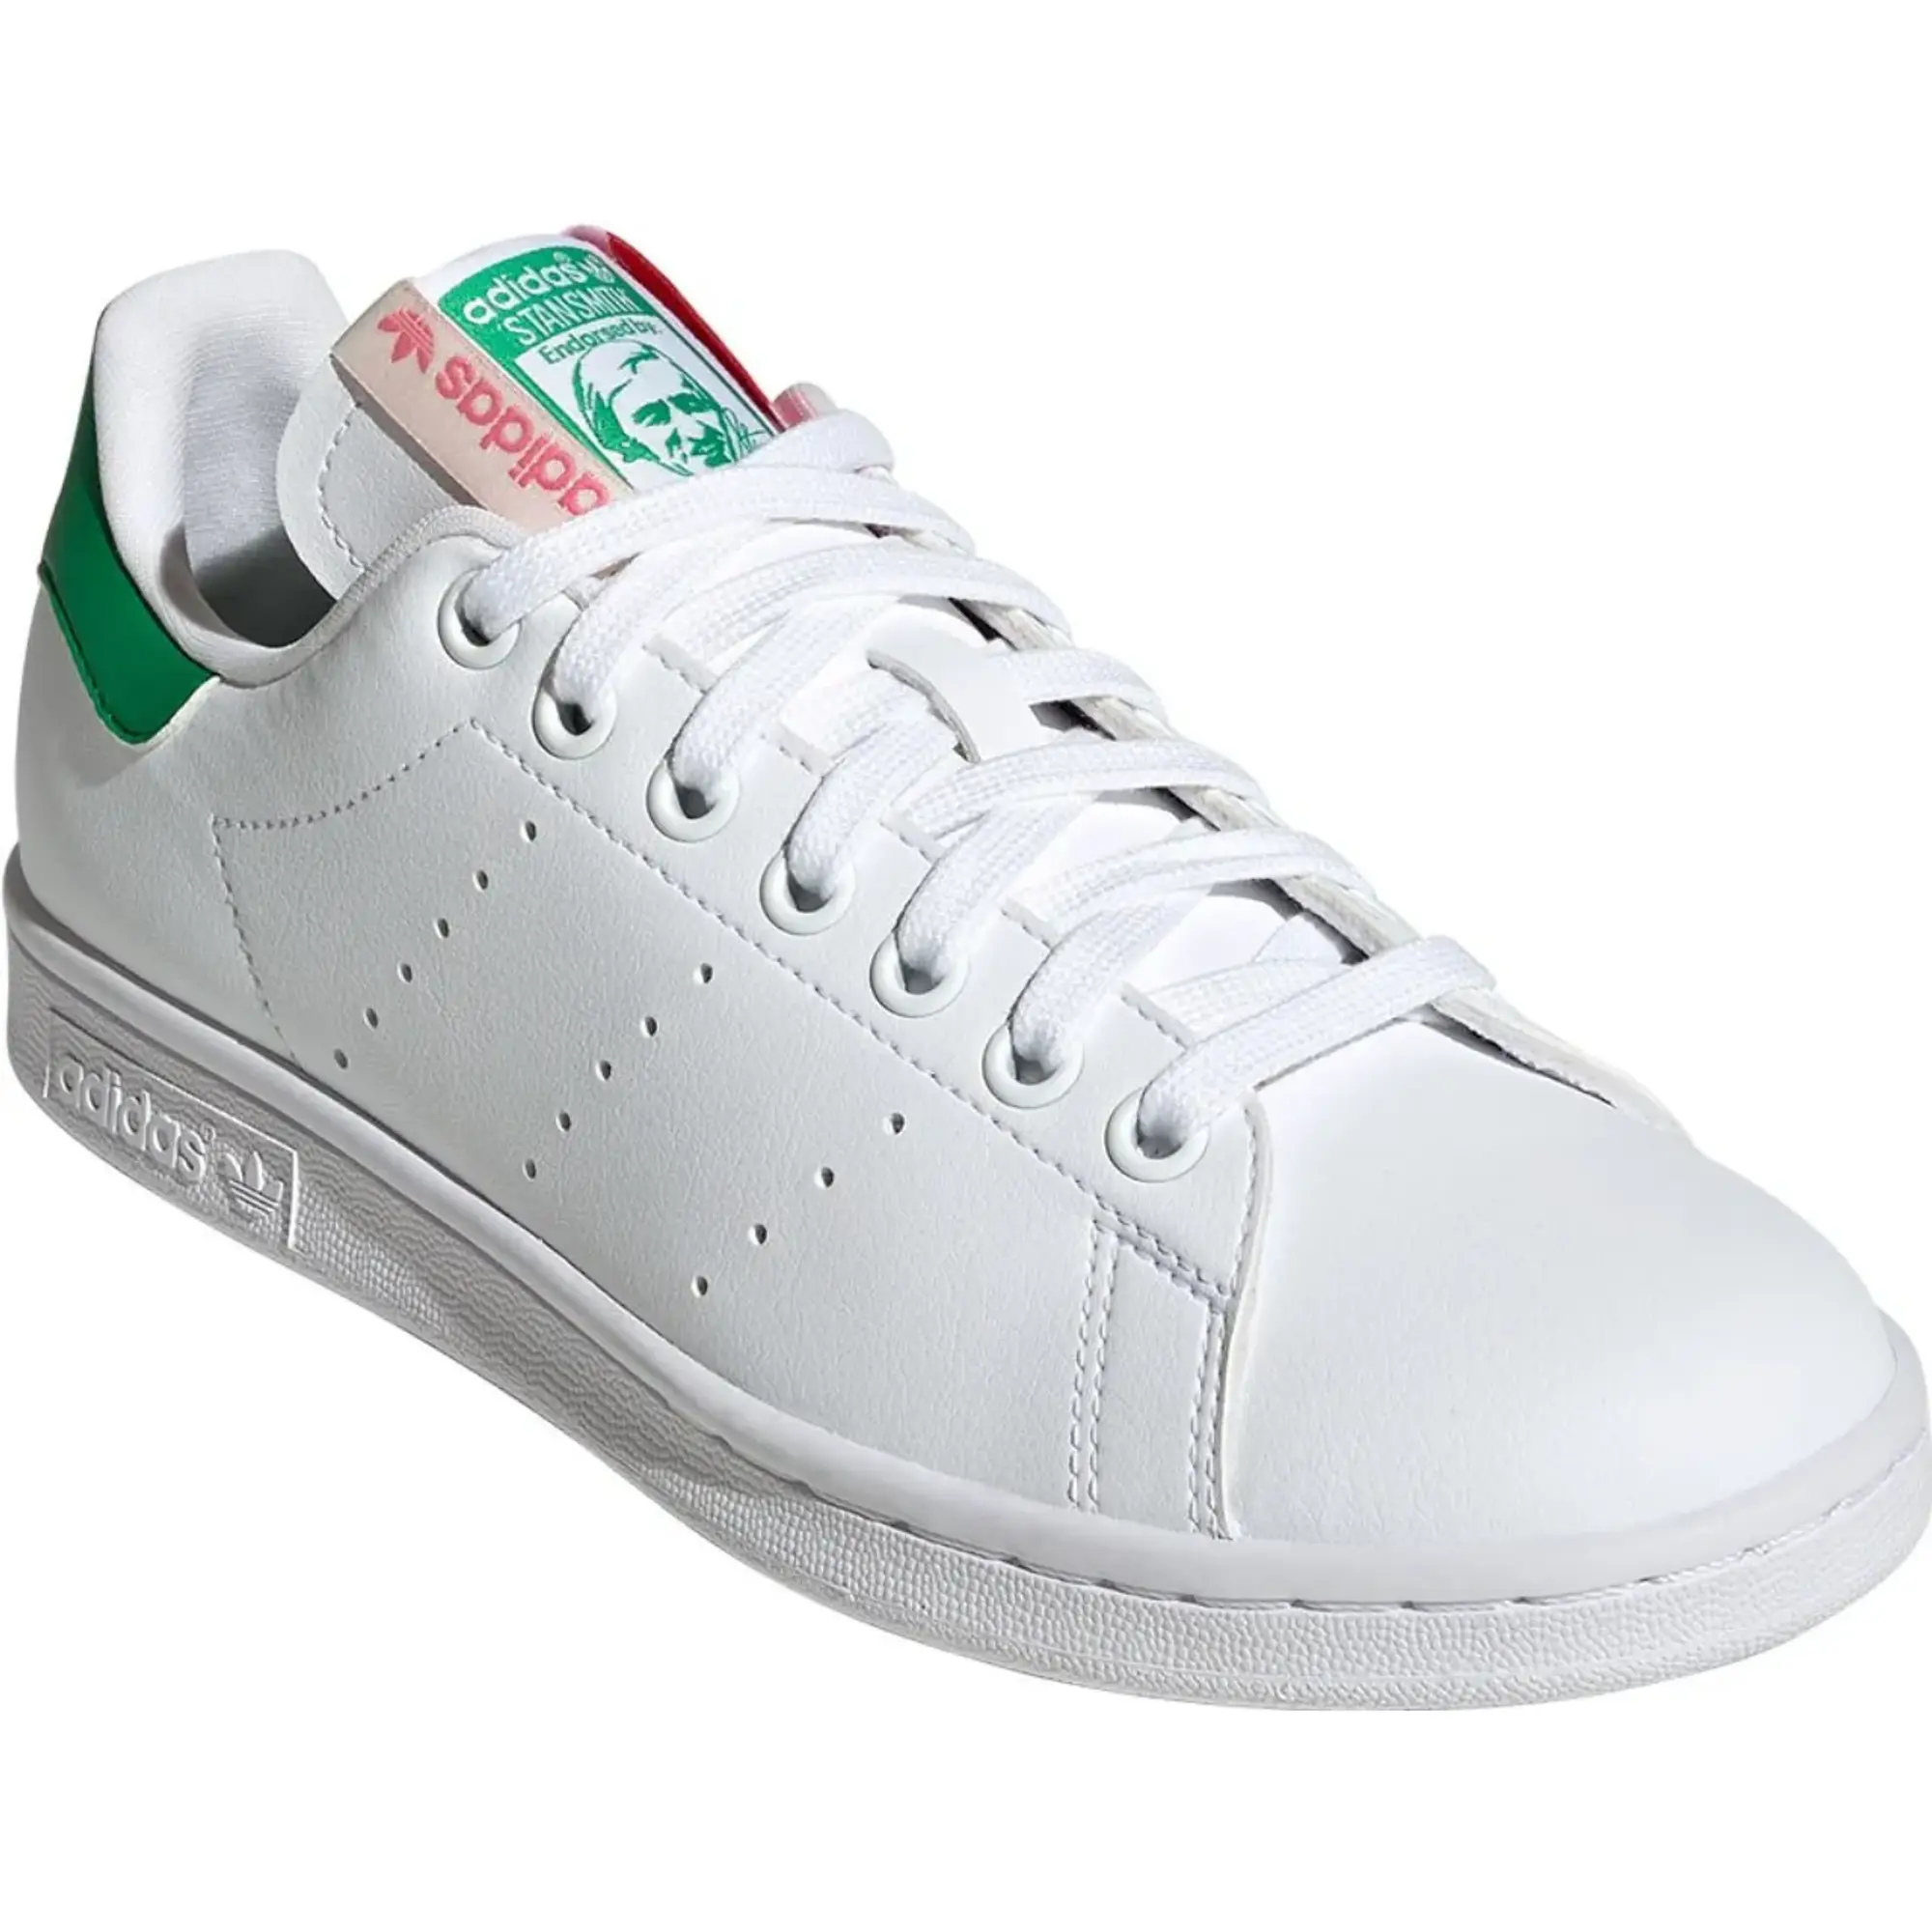 Adidas Stan Smith W Ftw White/ Green/ Bliss Pink